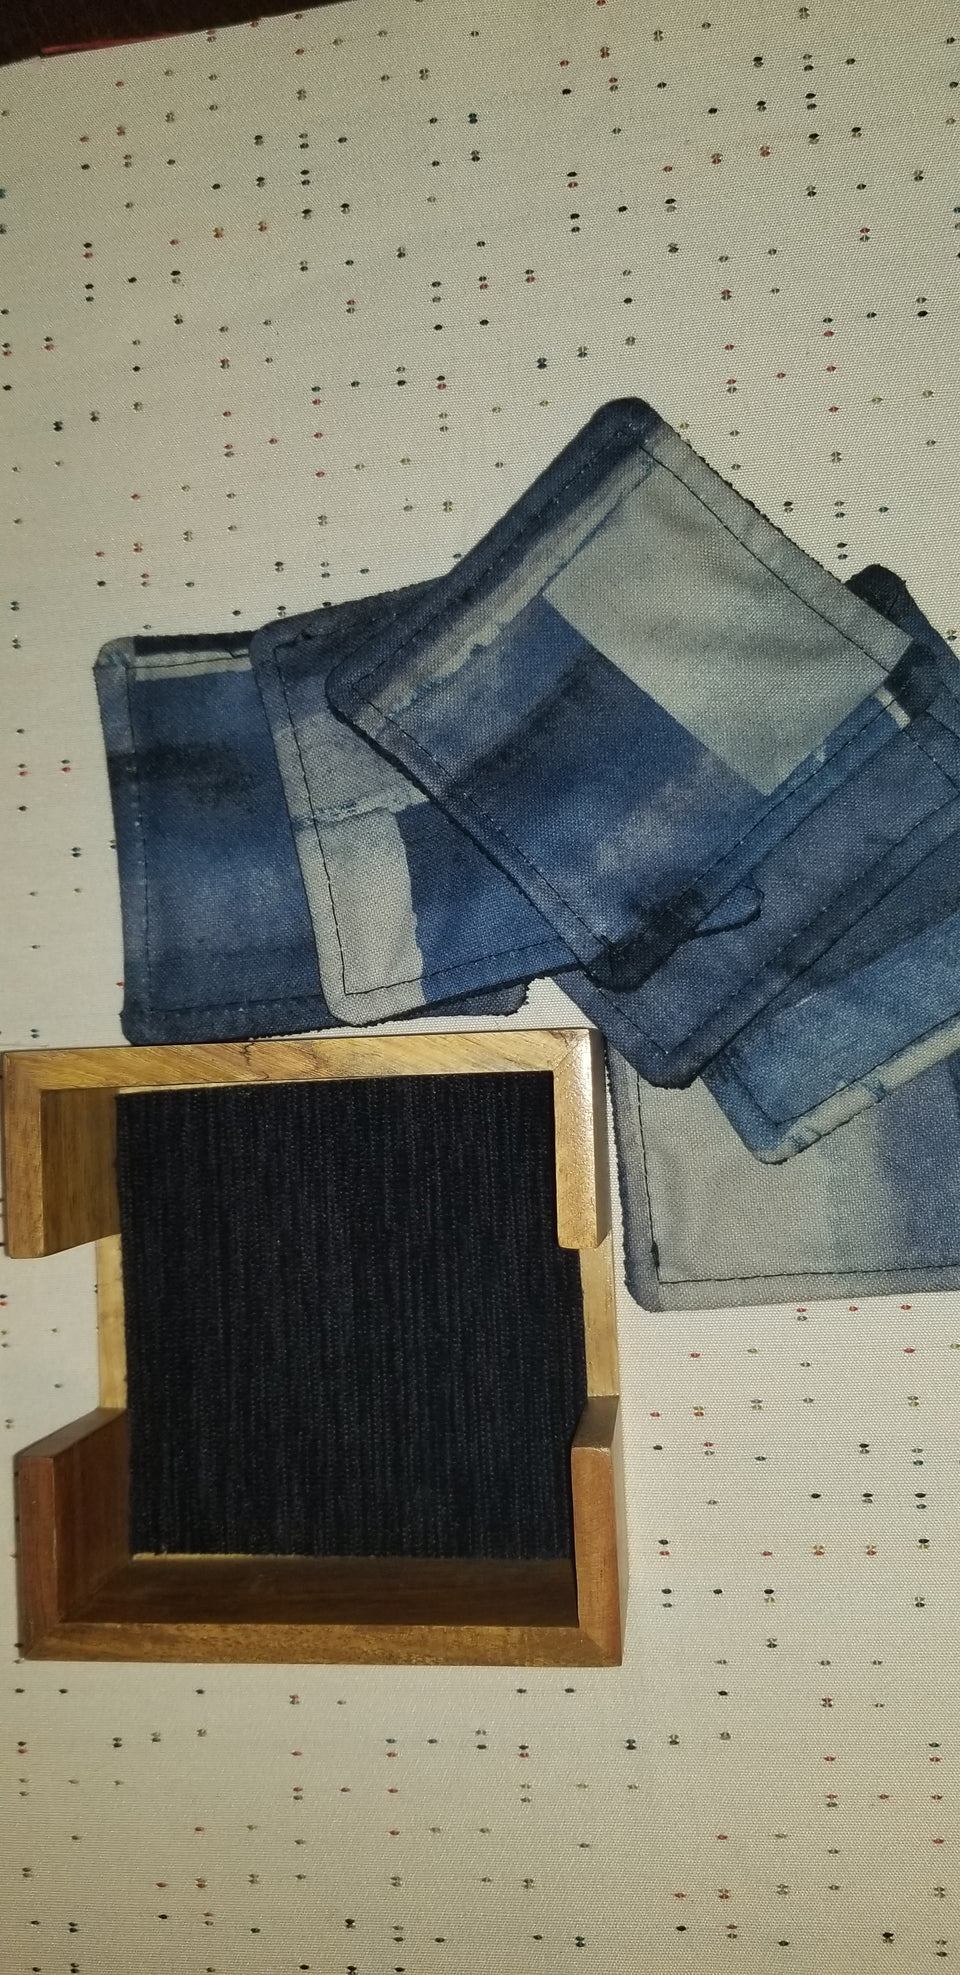 Modern square acacia wood coaster holder with blue velour lining and Chase blue and gray matching coasters.